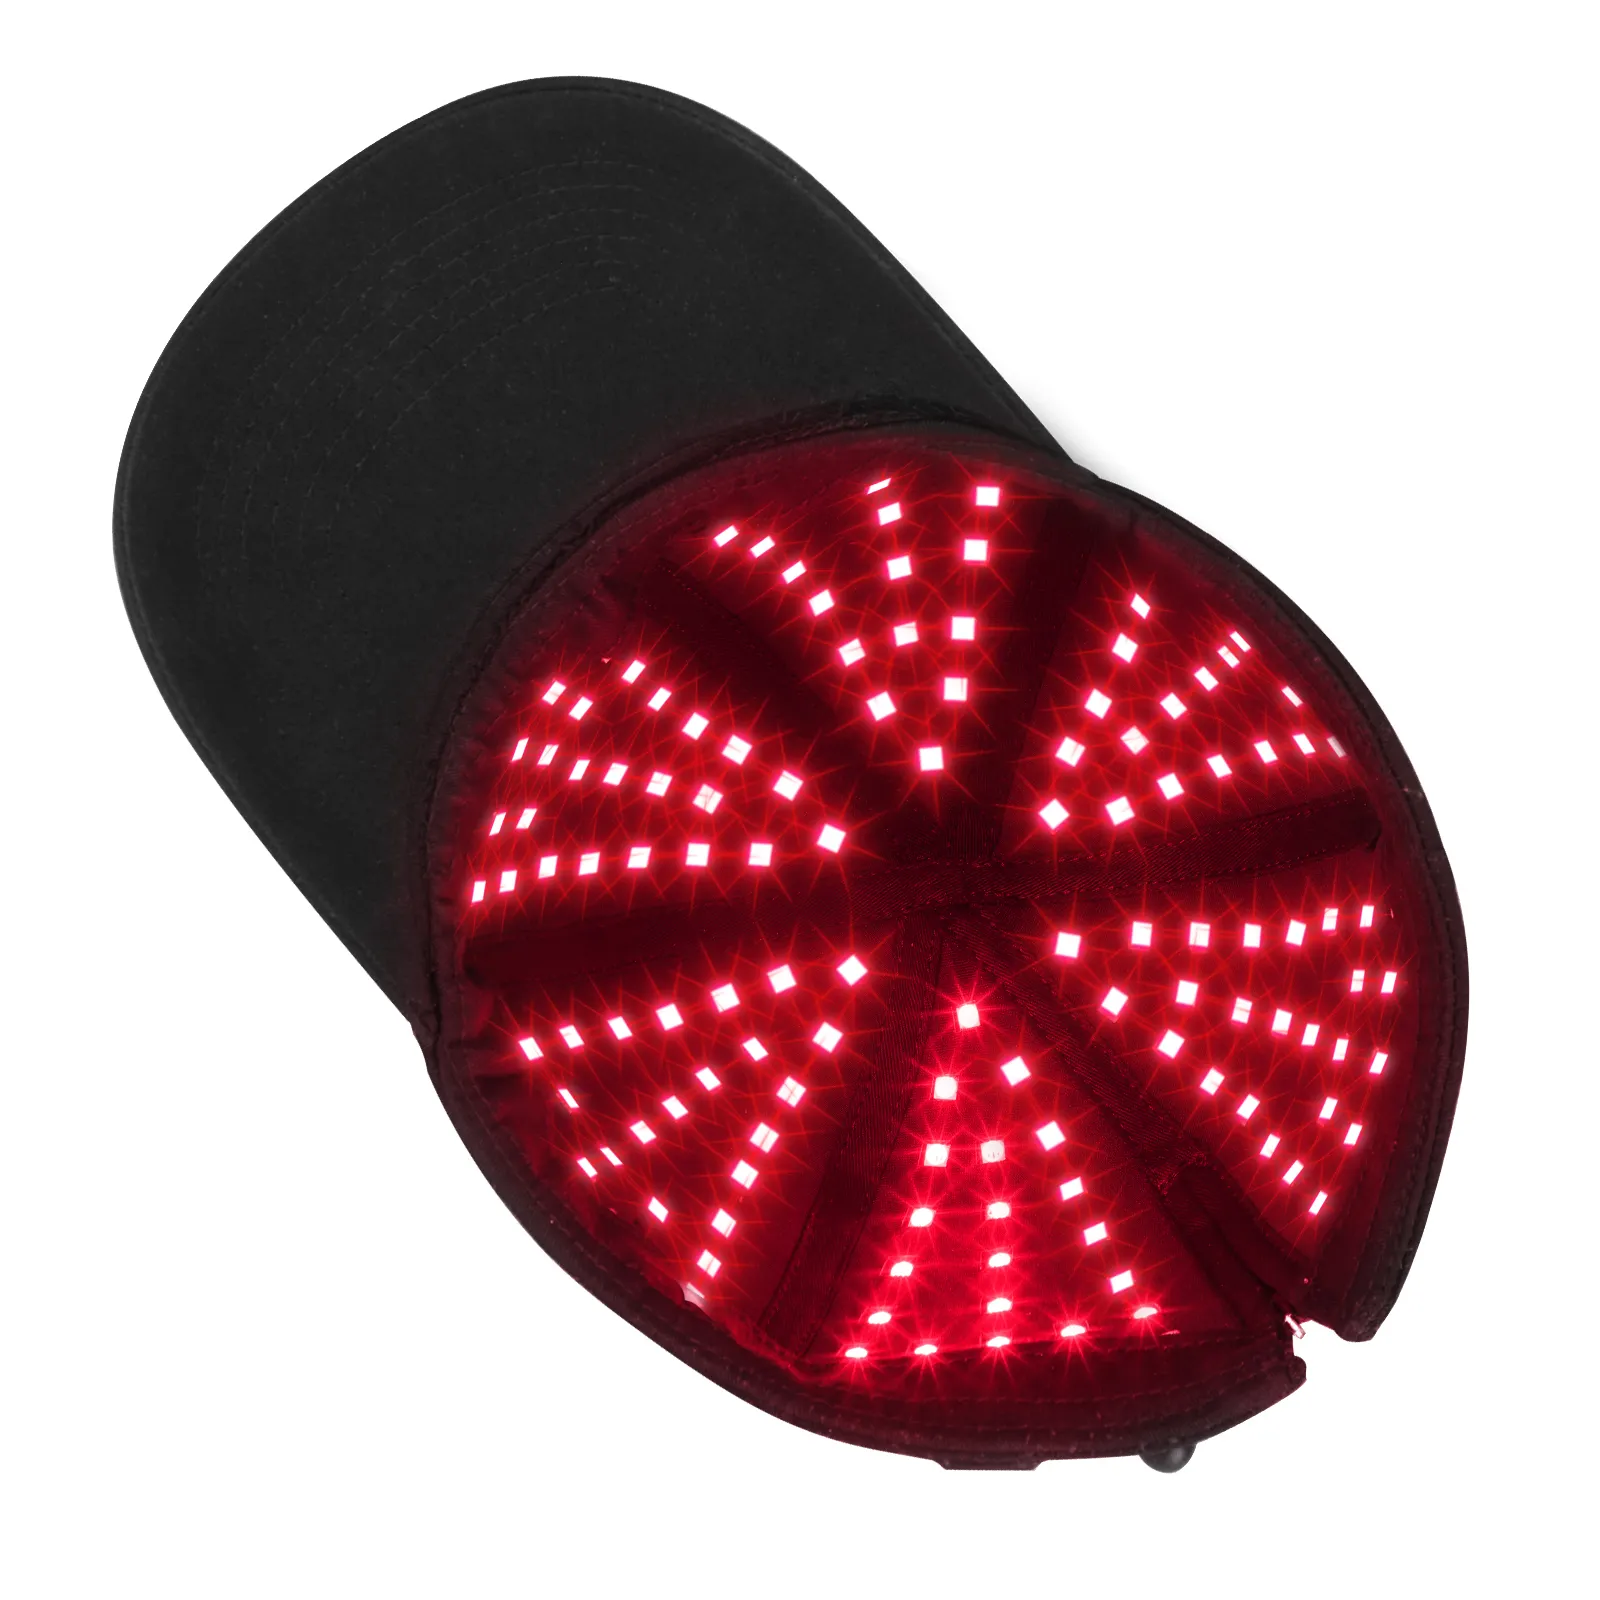 New Led Red Light Hat 660nm 850nm 940nm Led Red Light Helmet Infrared Therapy Hat Cap For Hair Regrowth